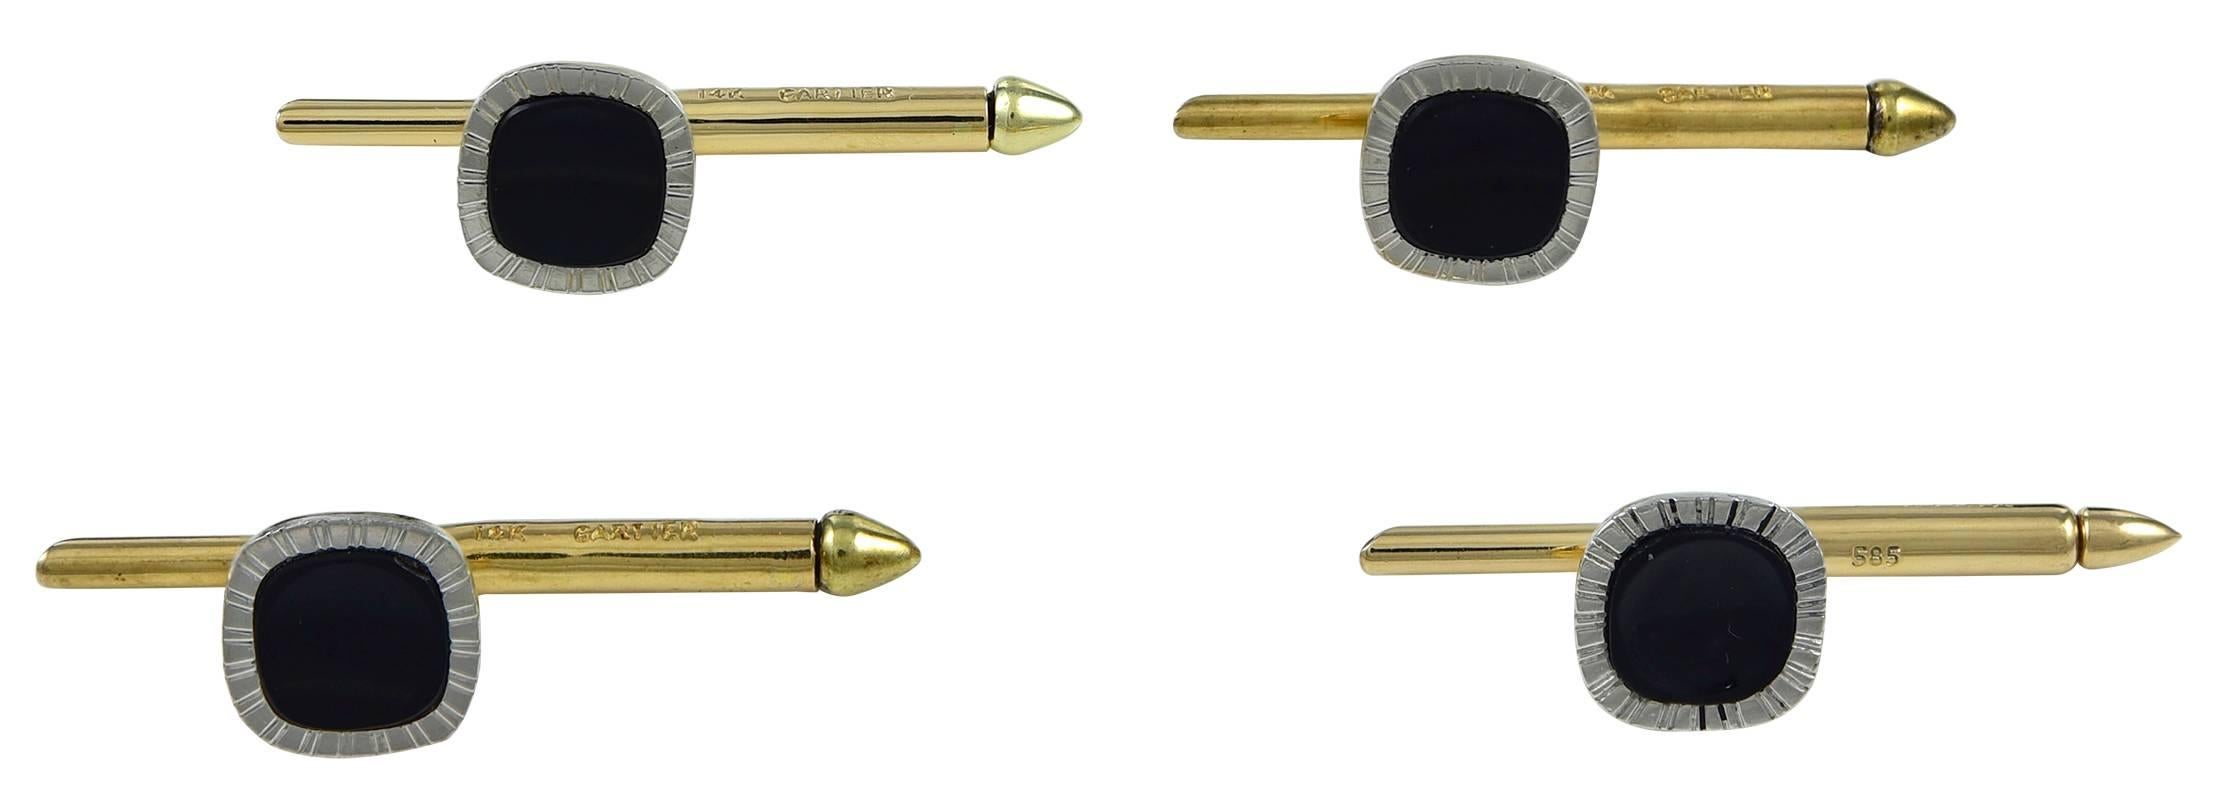 Handsome stud set, with two double-sided cufflinks and four matching studs.  Made, signed and numbered by CARTIER.  Polished black onyx, with a platinum border that has a carved art deco line pattern.  The backs and connectors are 14K yellow gold. 